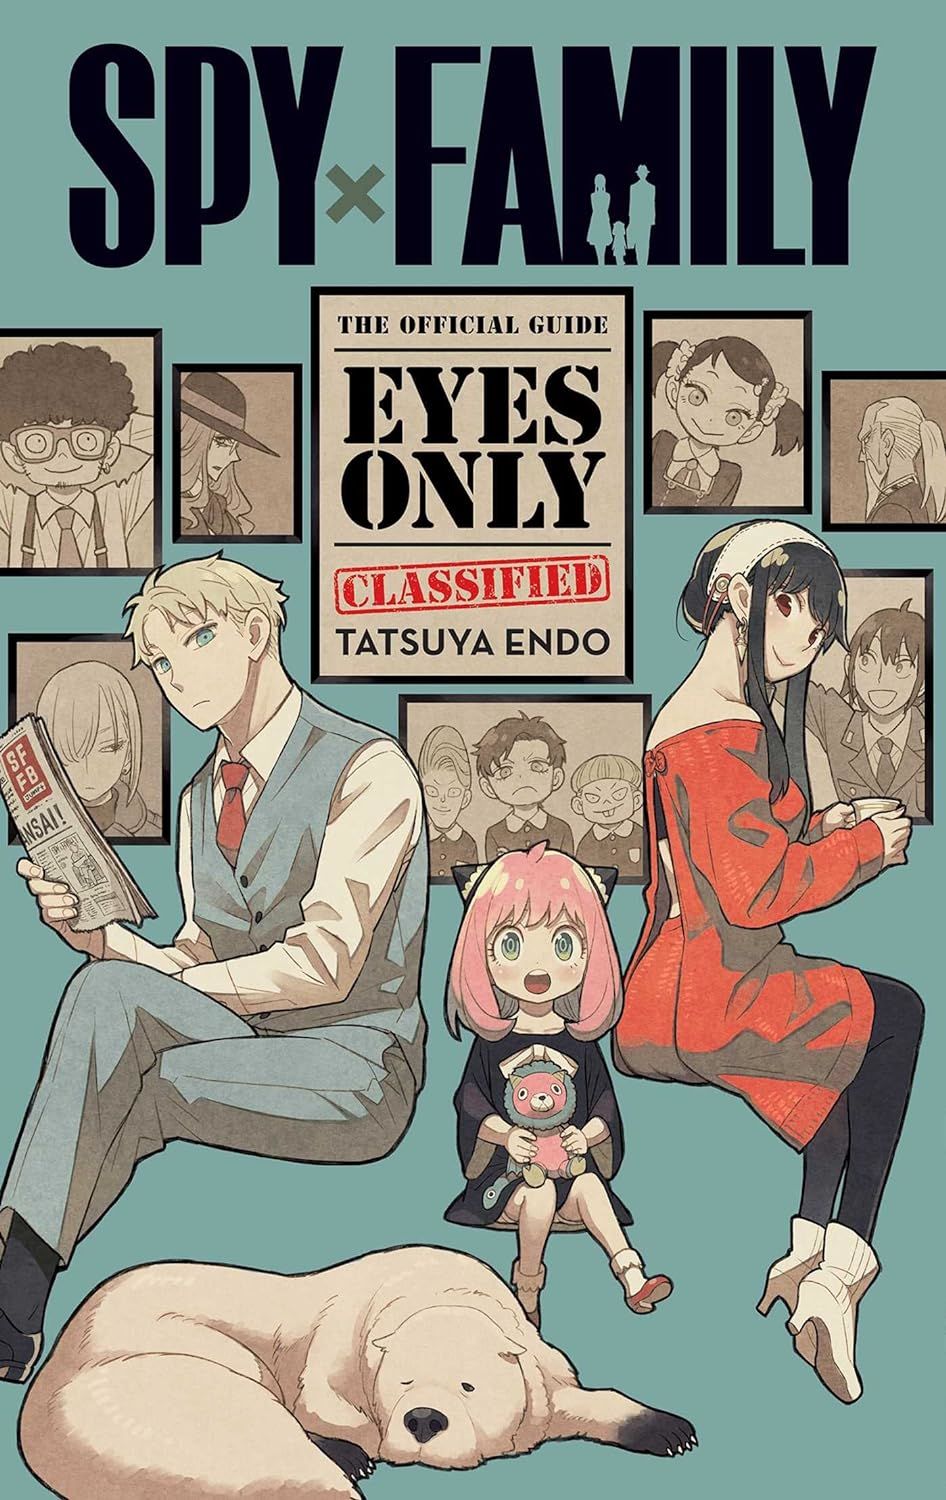 Spy x Family: The Official Guide ― Eyes Only